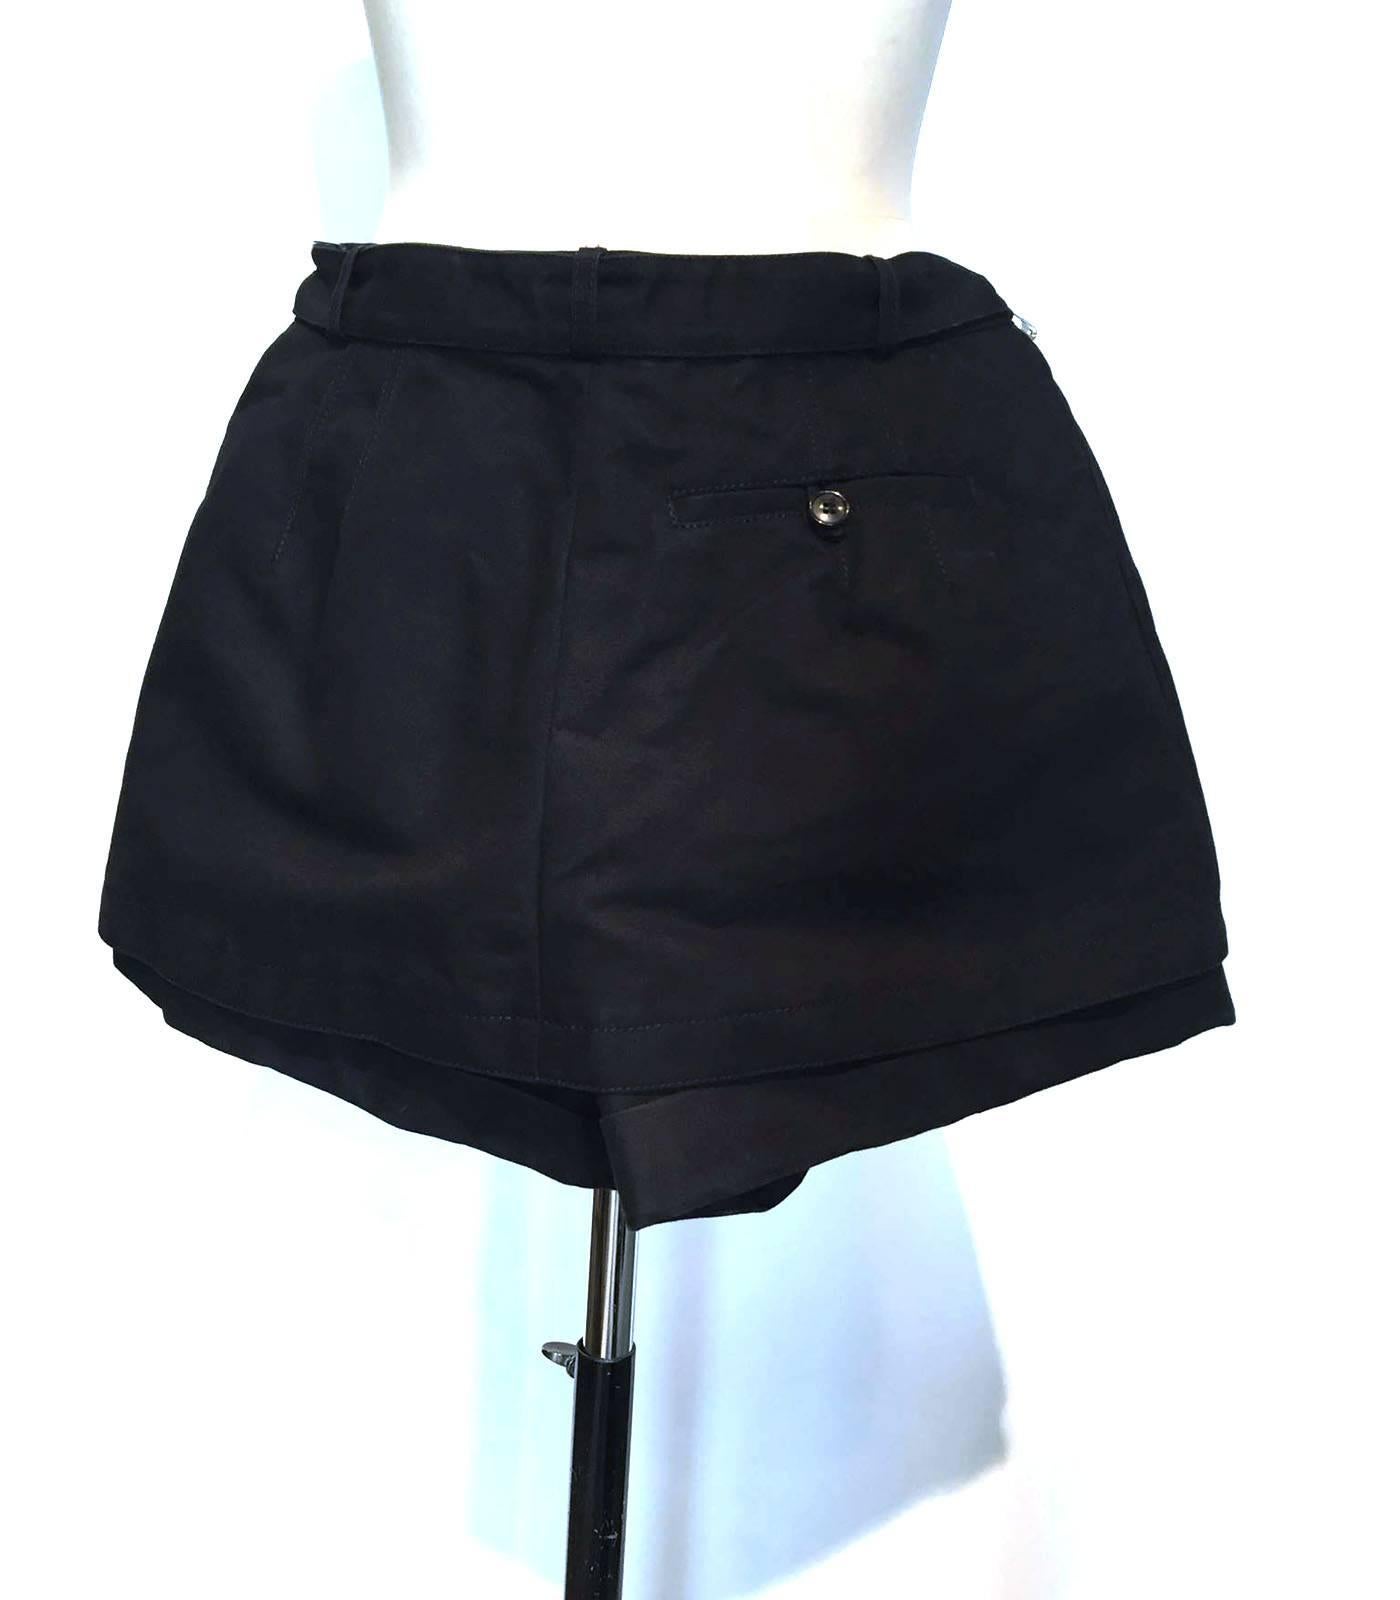 Mini Skort or shorts, this is a unique piece by Balenciaga, thick stiff cotton, extended skirt top overlay, waist band and lots of kool details makes this piece an instant sensation.